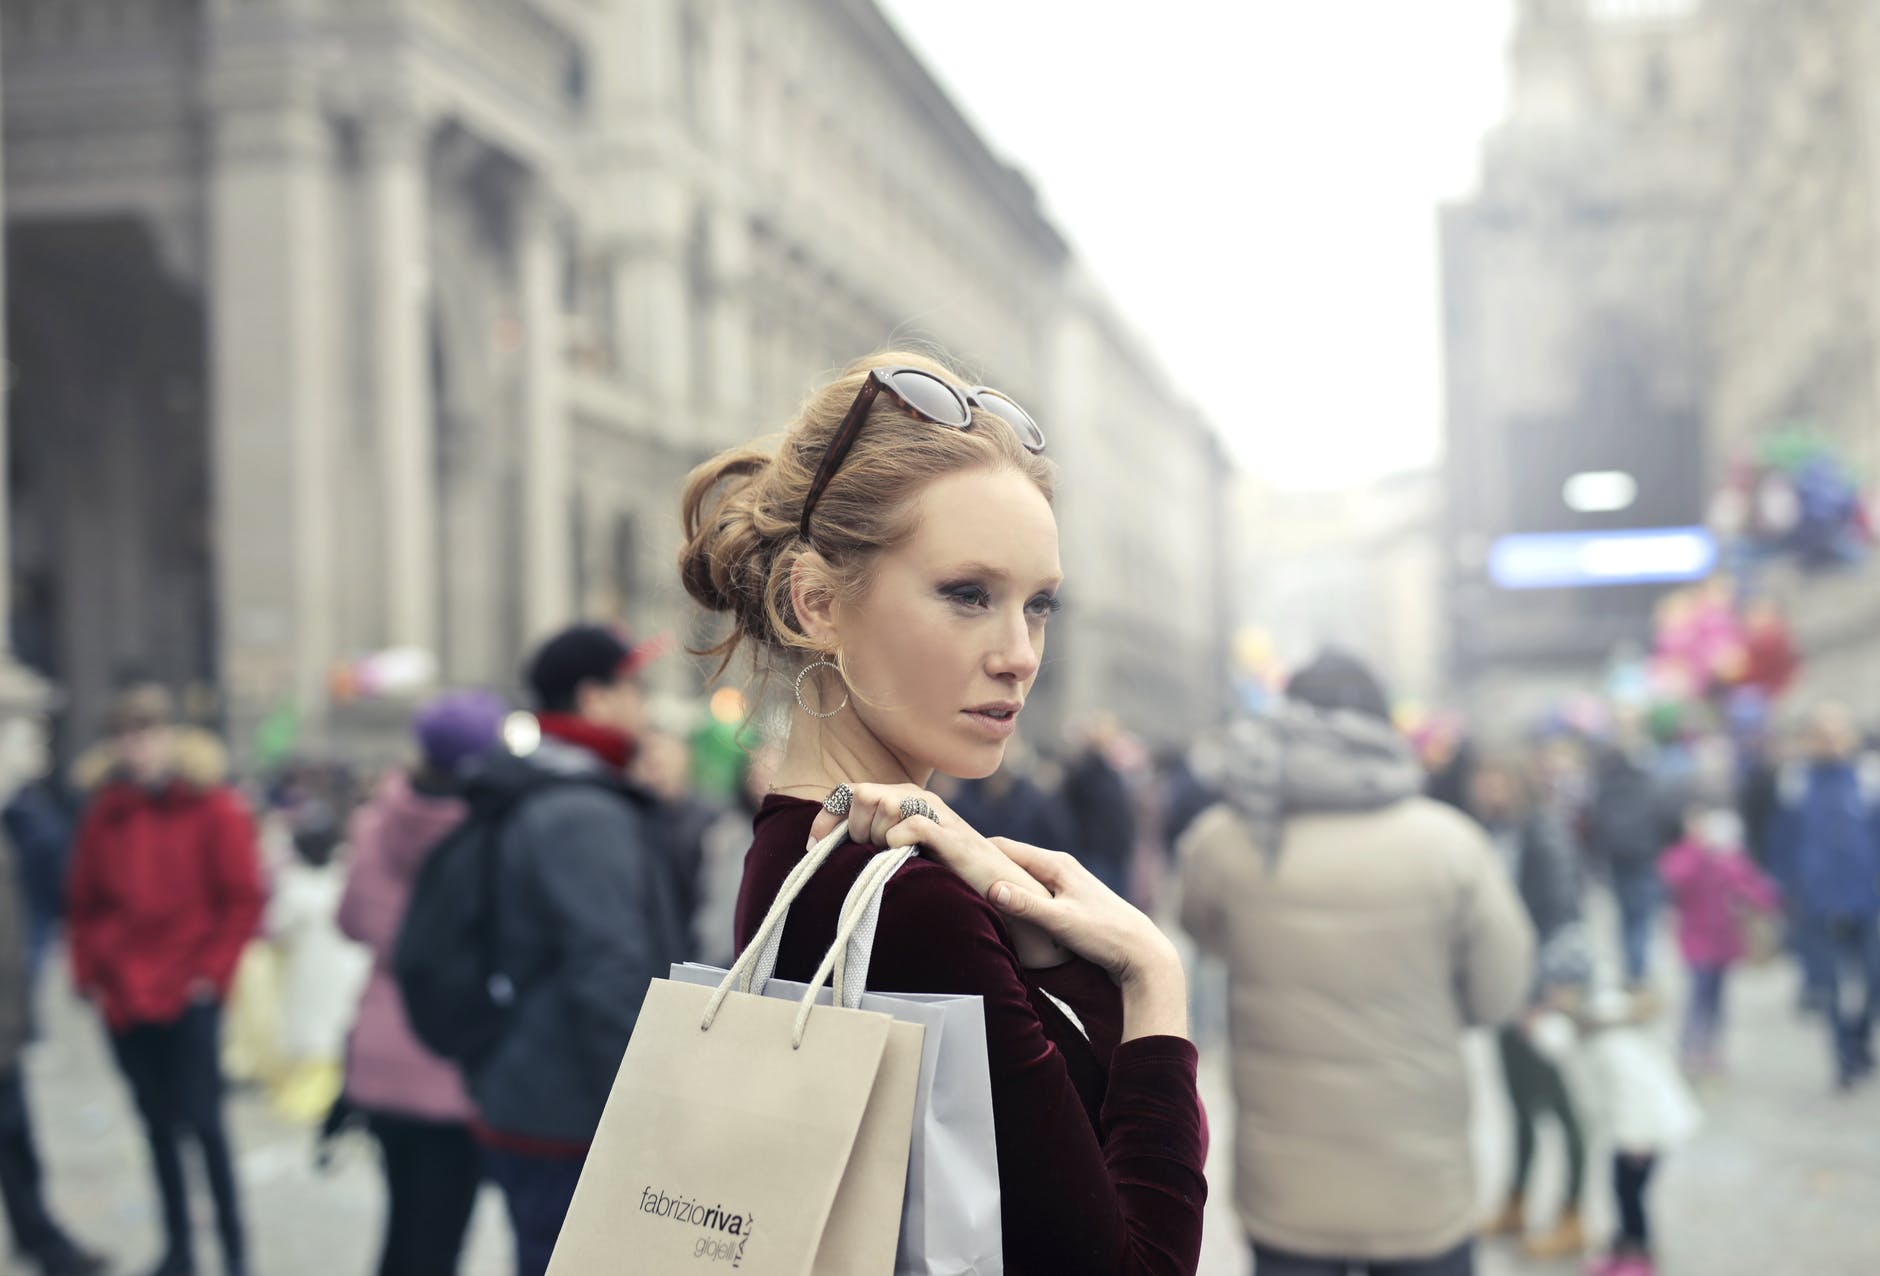 woman wearing maroon long sleeved top carrying brown and white paper bags in selective focus photography